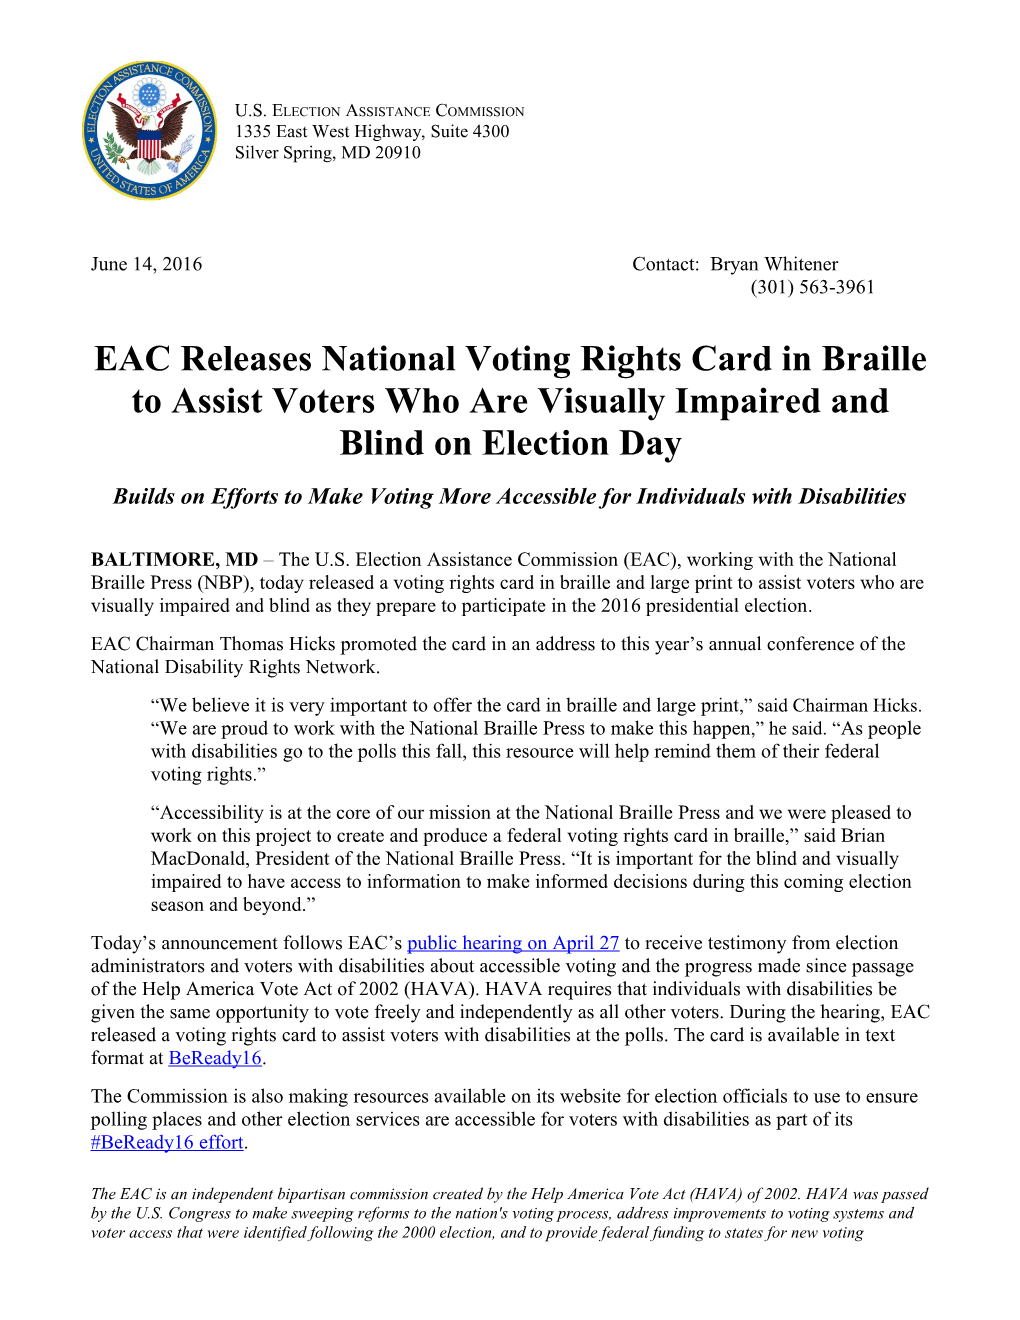 Builds on Efforts to Make Voting More Accessible for Individuals with Disabilities